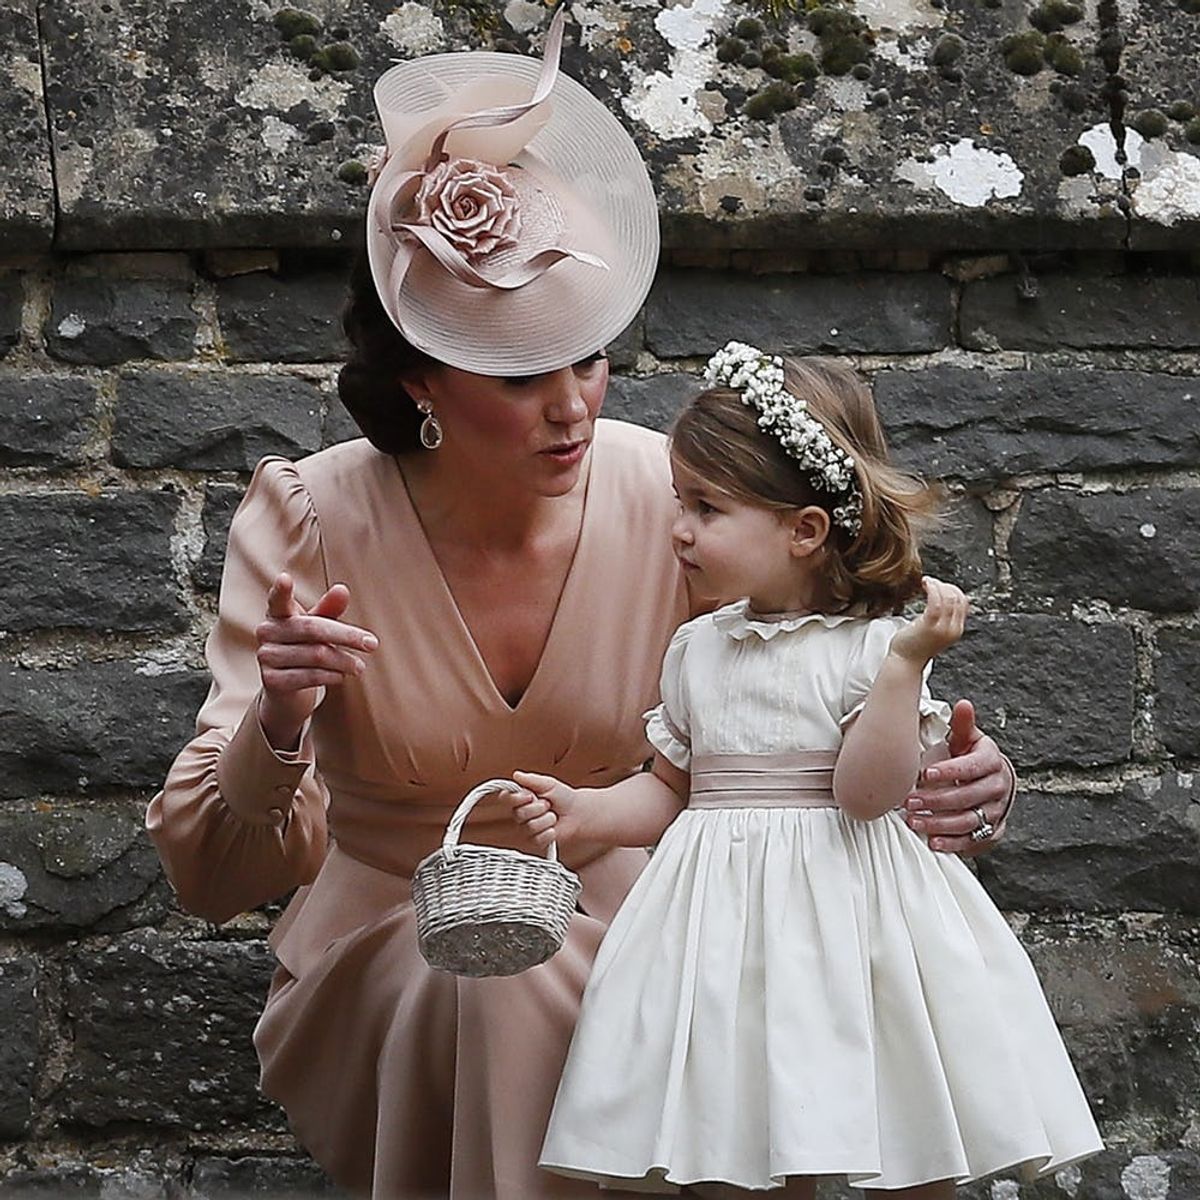 Princess Charlotte and Prince George Were THE Cutest Guests at Pippa Middleton’s Wedding